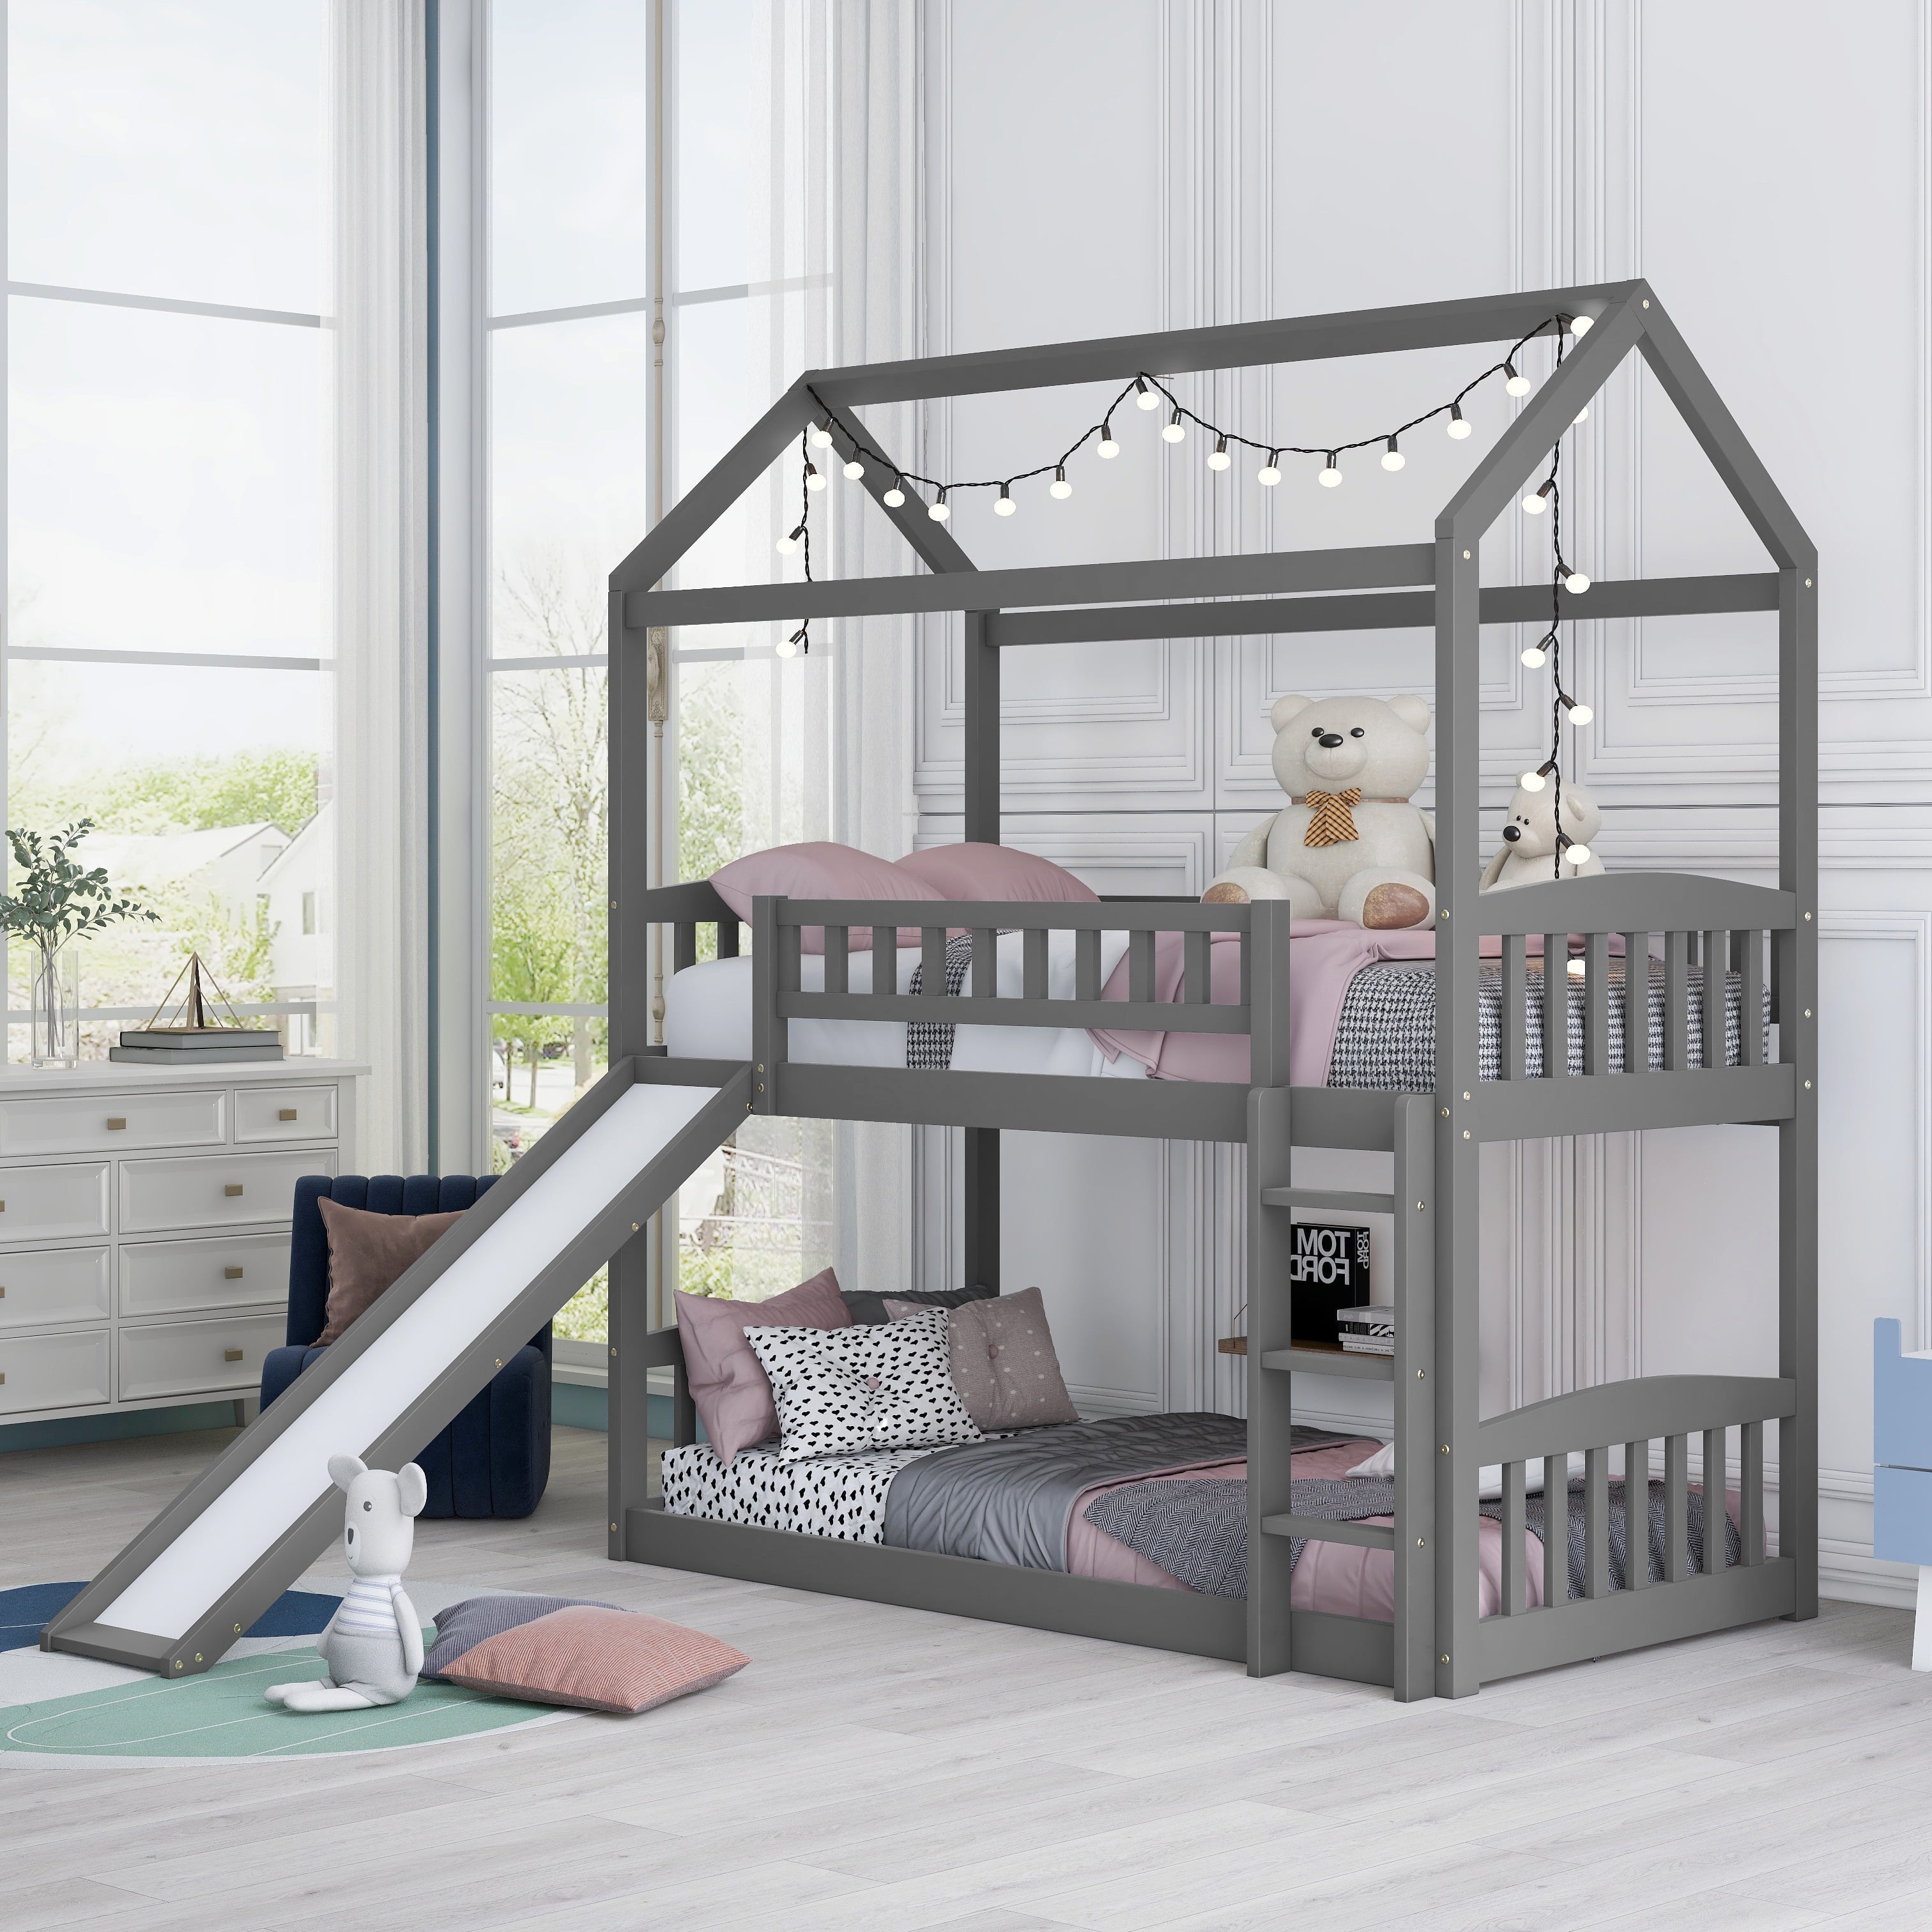 Bellemave Bunk Bed with Slide, Wood Twin Over Twin House Bed Frame with Ladder for Kids Teens(Gray)